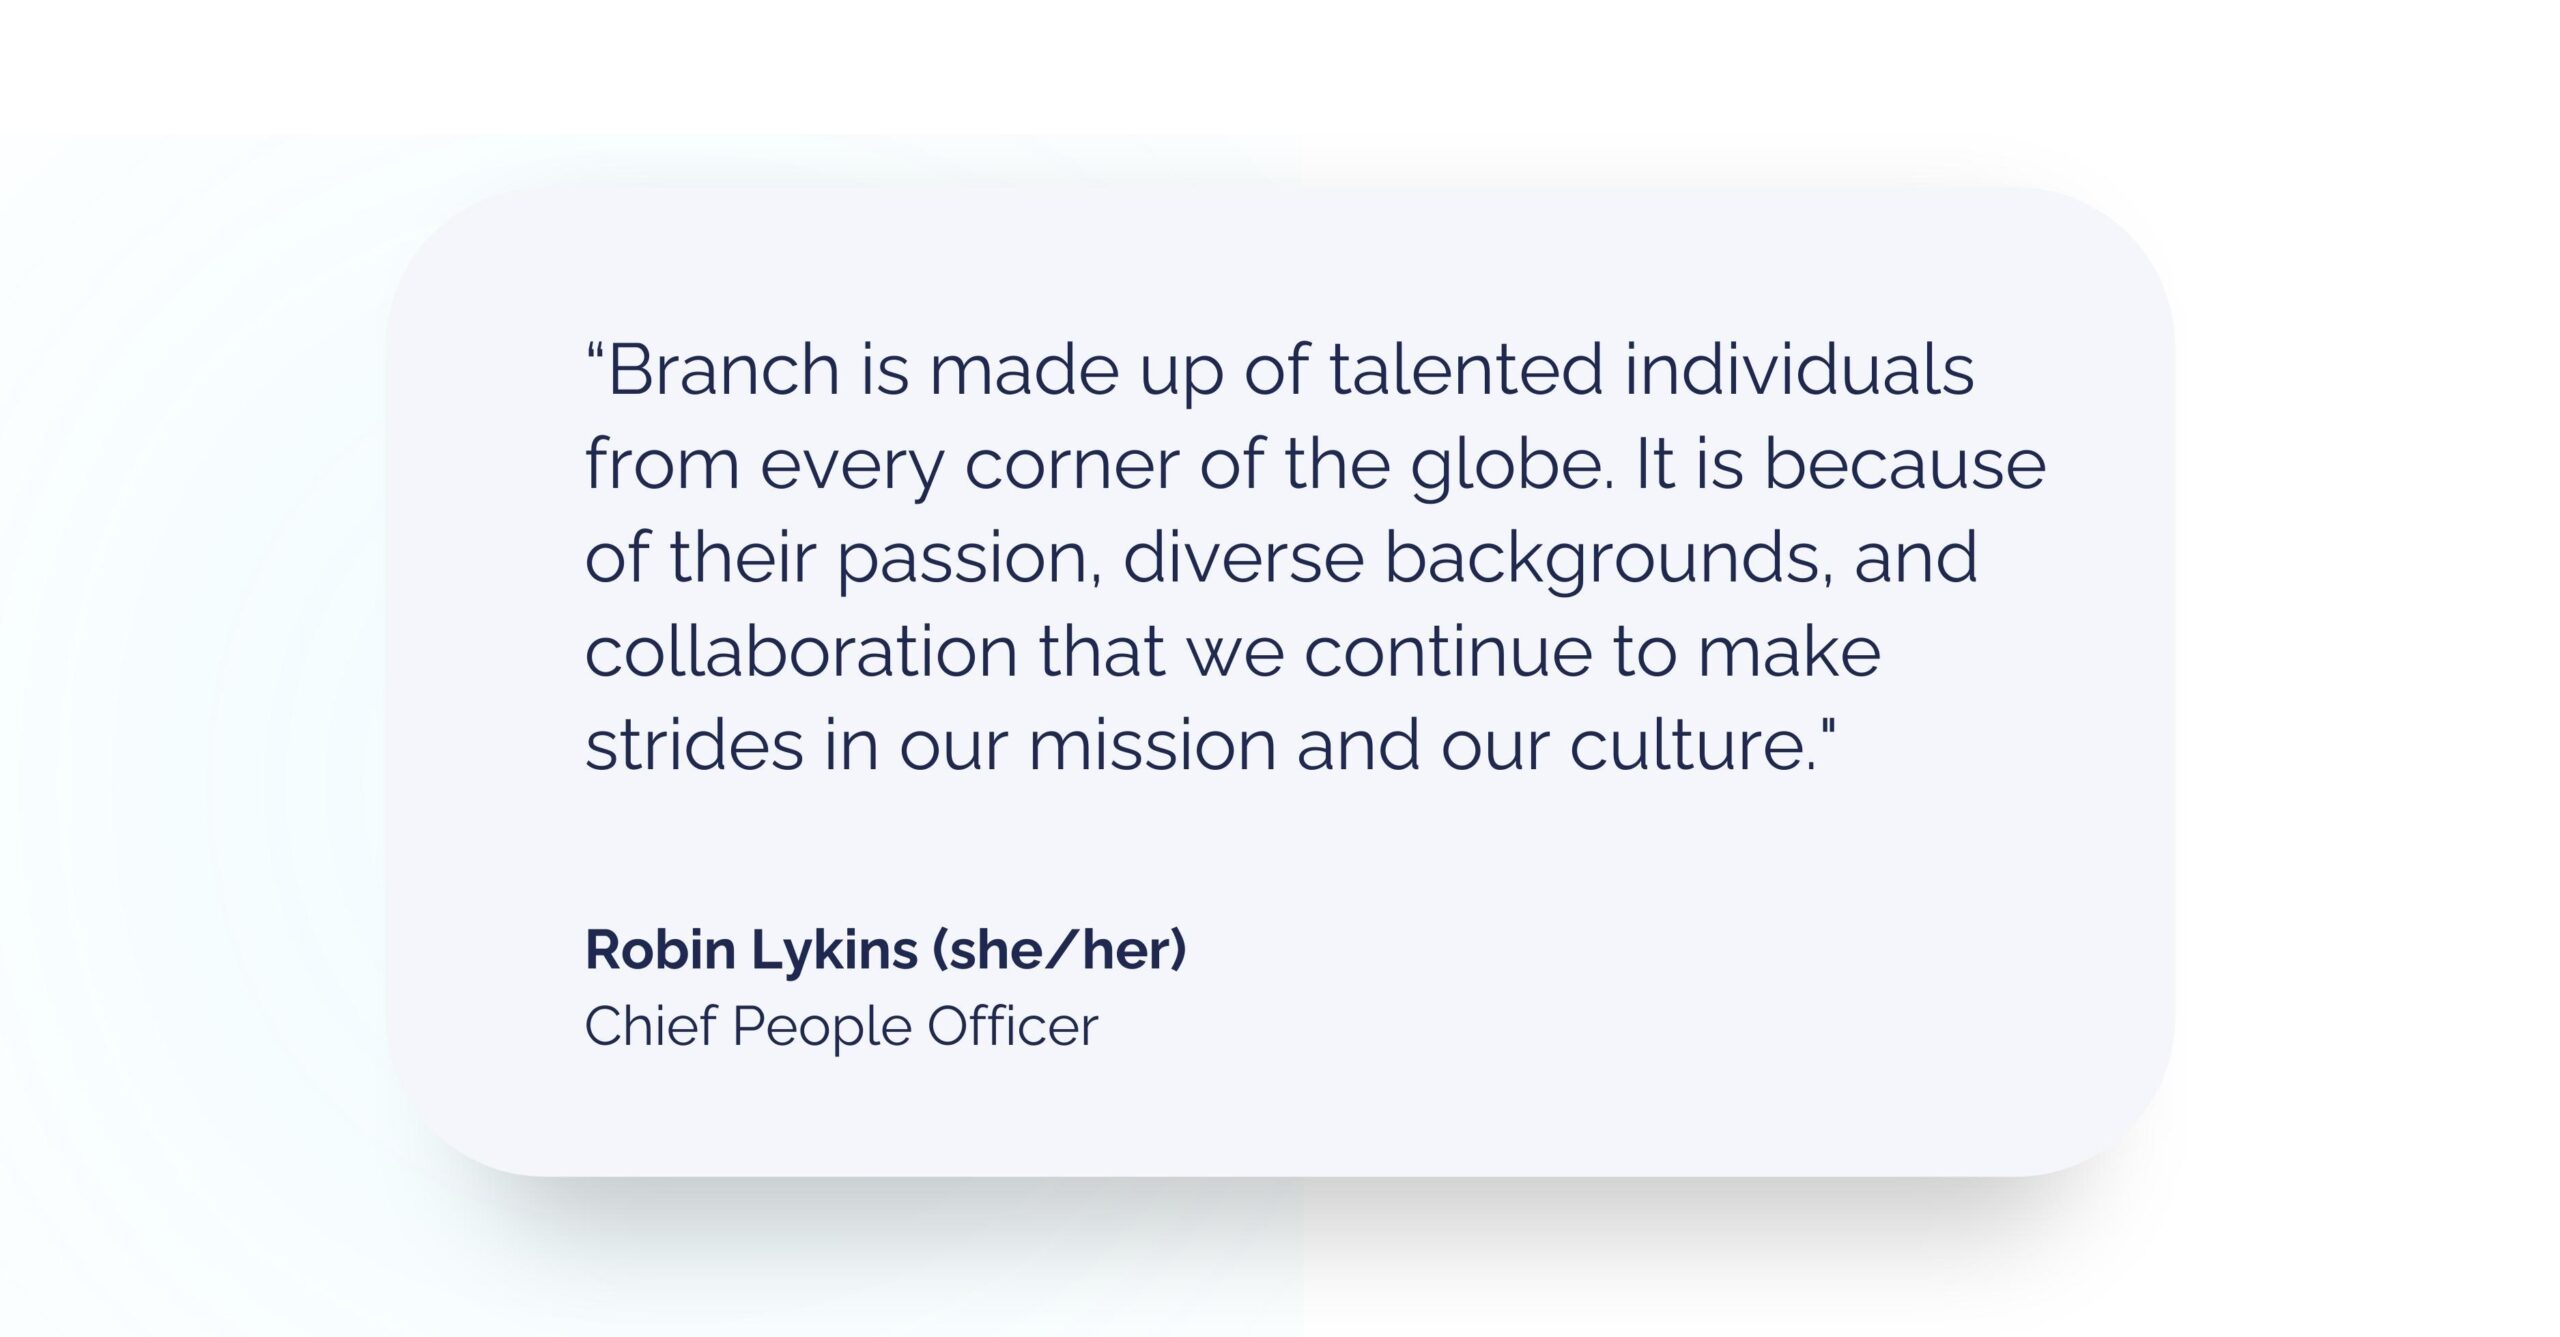 “Branch is made up of talented individuals from every corner of the globe," said Robin Lykins, Branch Chief People Officer. "It is because of their passion, diverse backgrounds, and collaboration that we continue to make strides in our mission and our culture." 